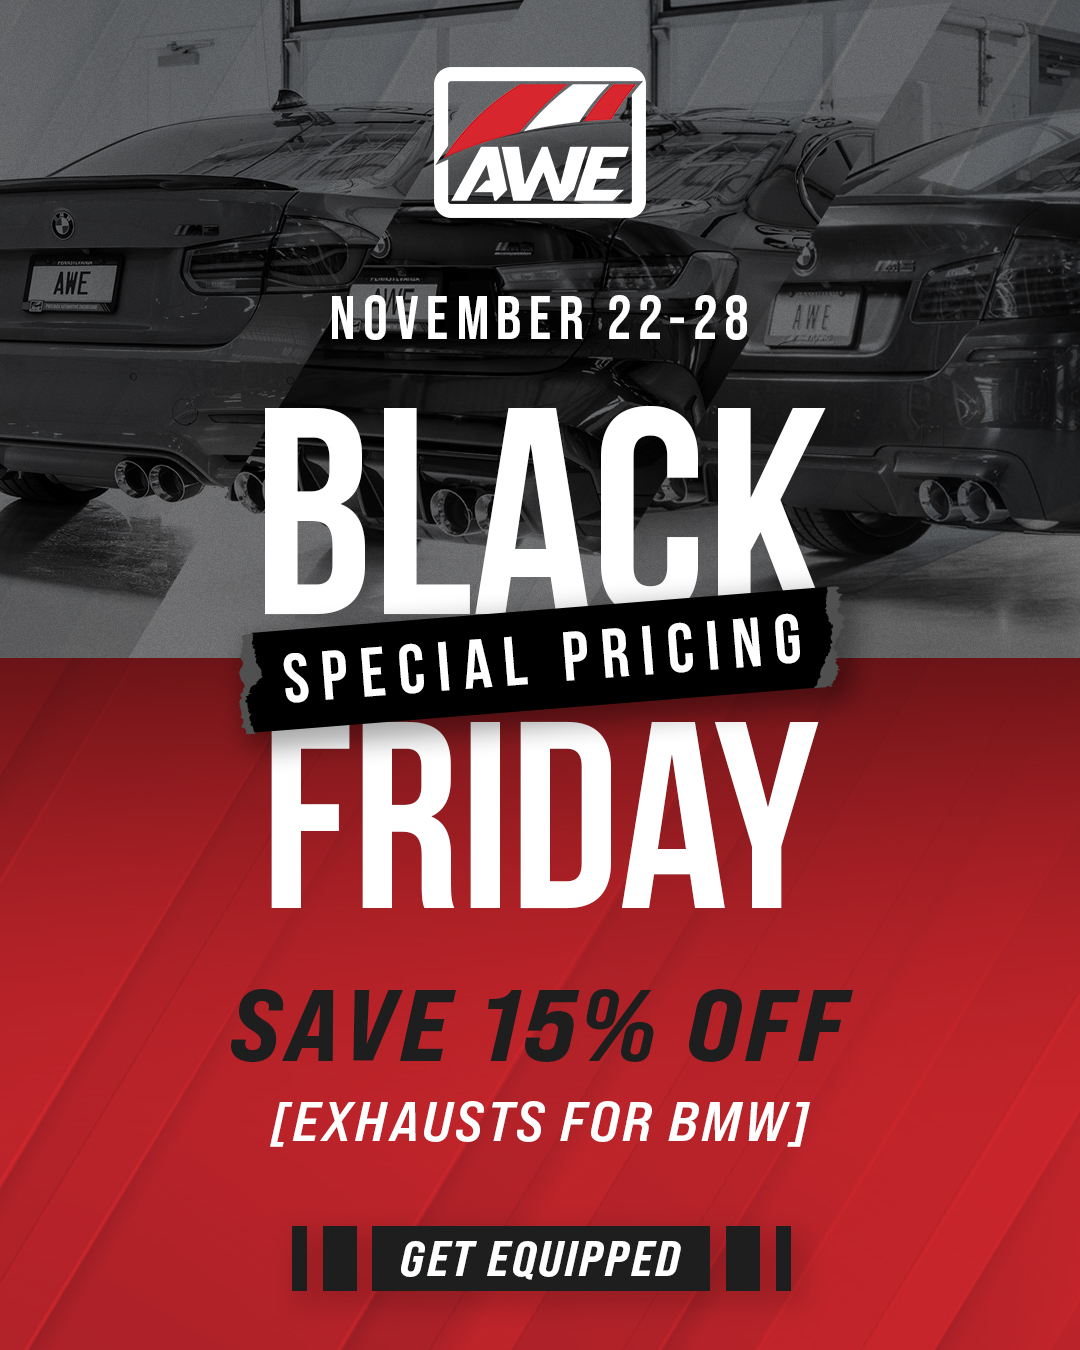 Save up to 15% off AWE BMW Exhaust Systems